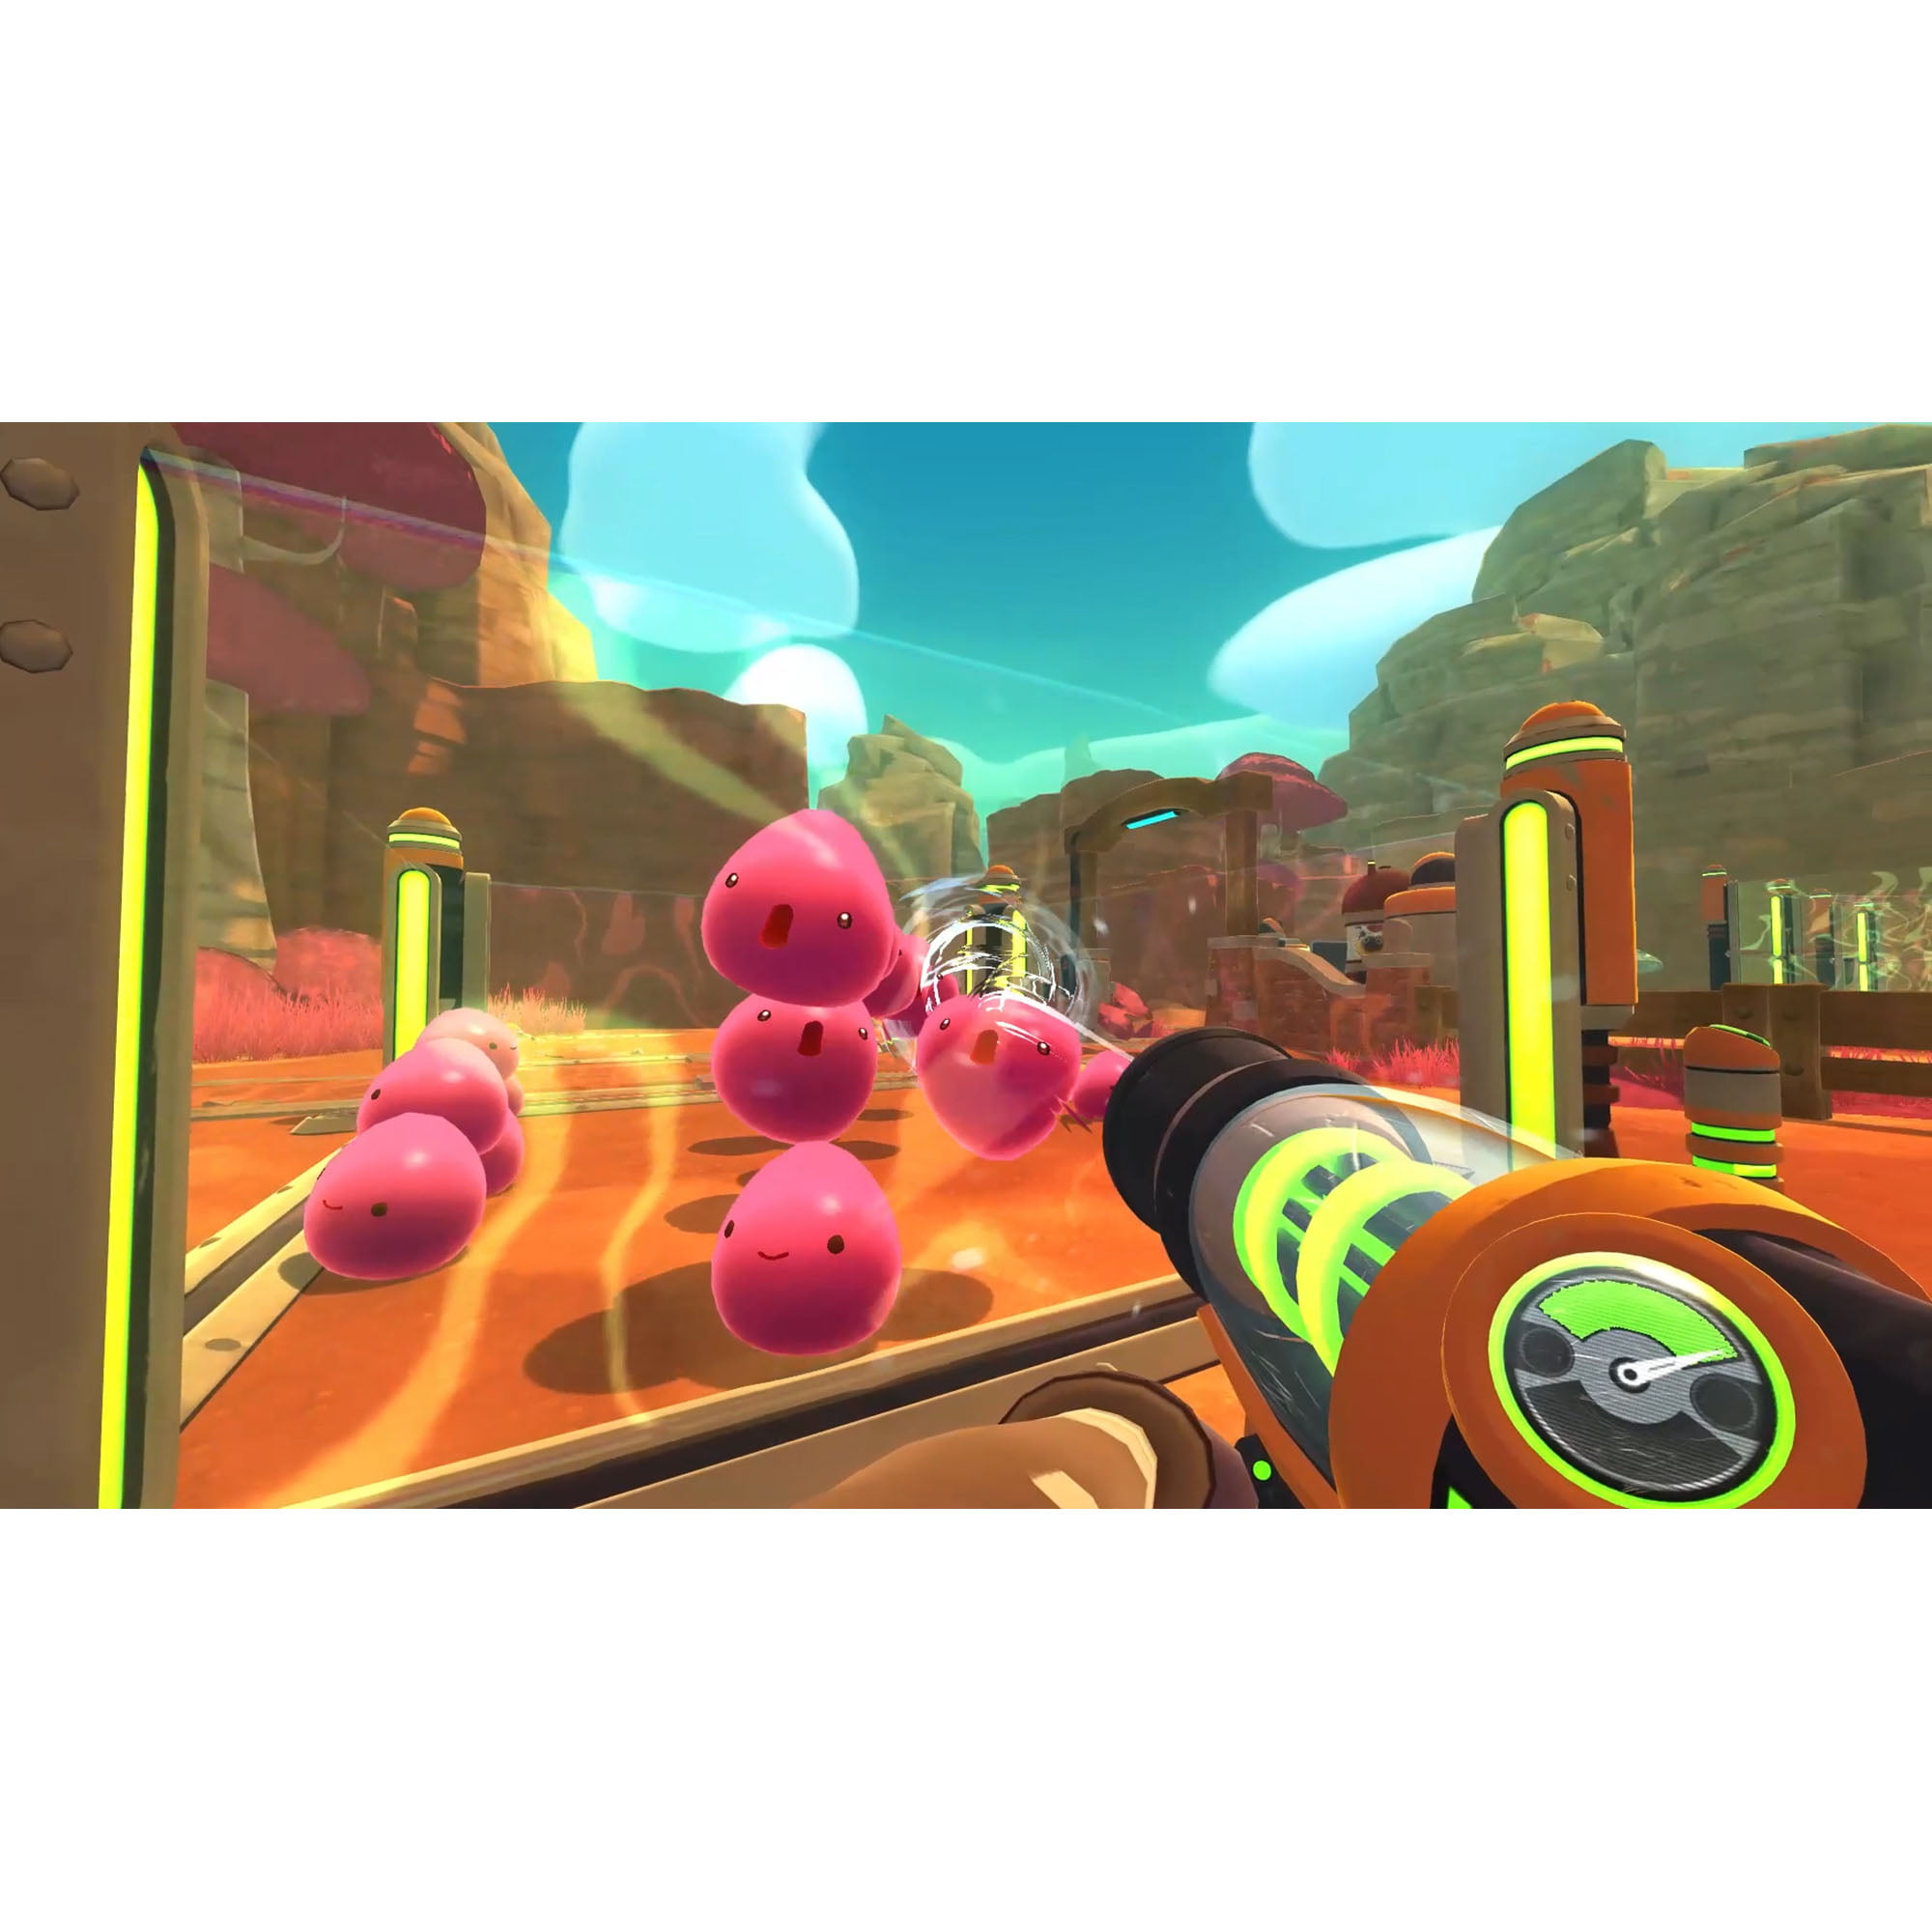 Slime Rancher 2 Xbox Series X, S Game Gift Code